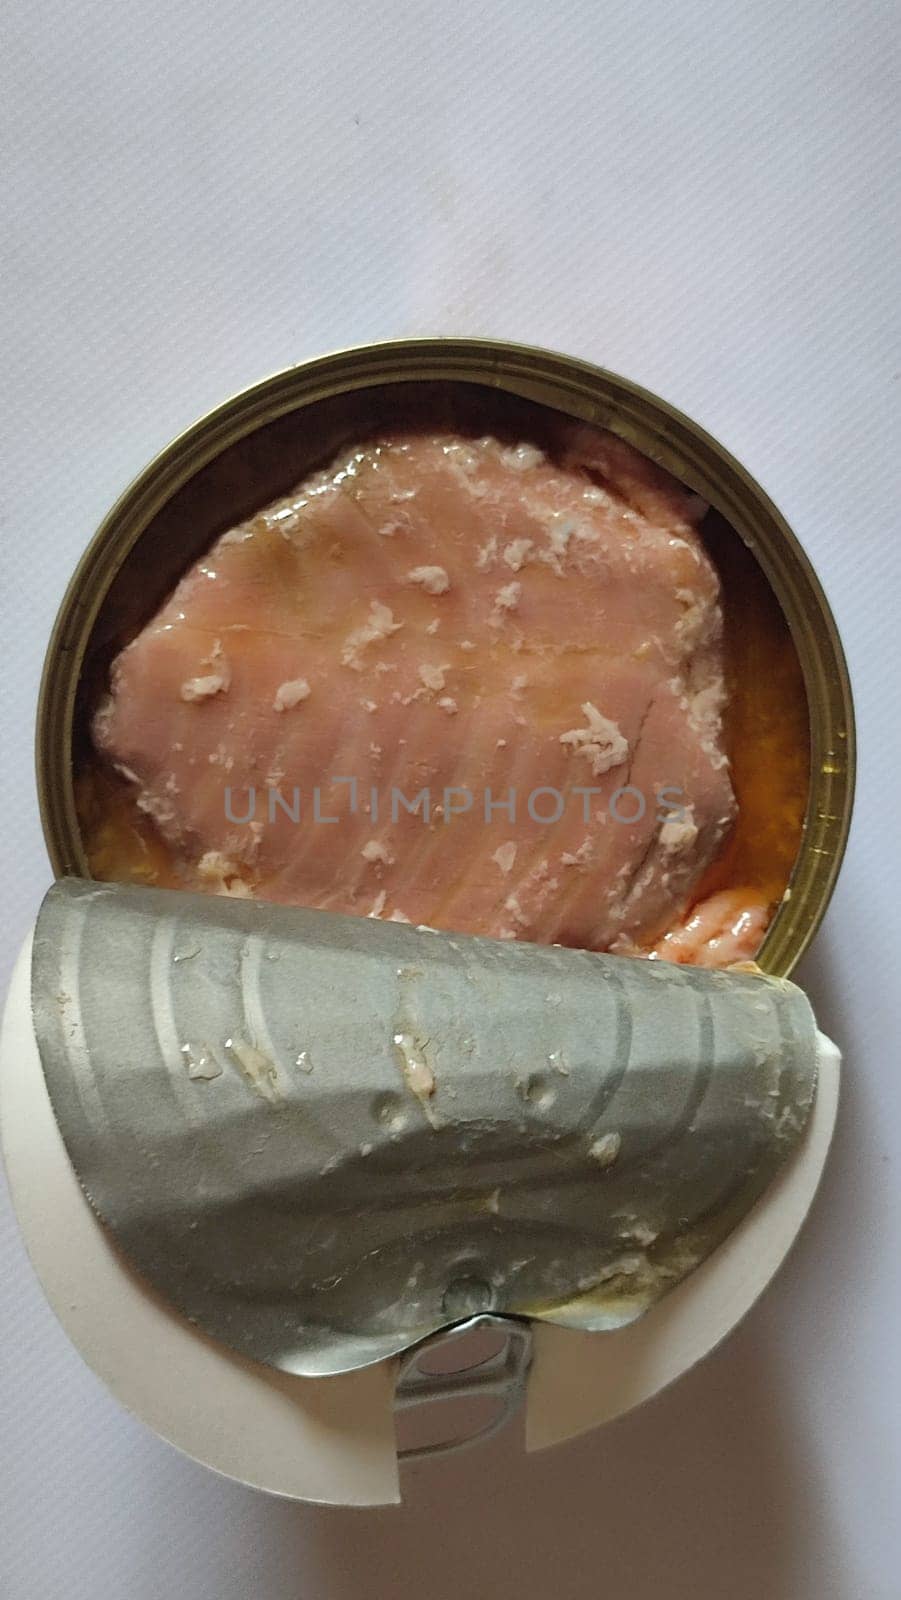 canned salmon fish, food in a jar. High quality photo